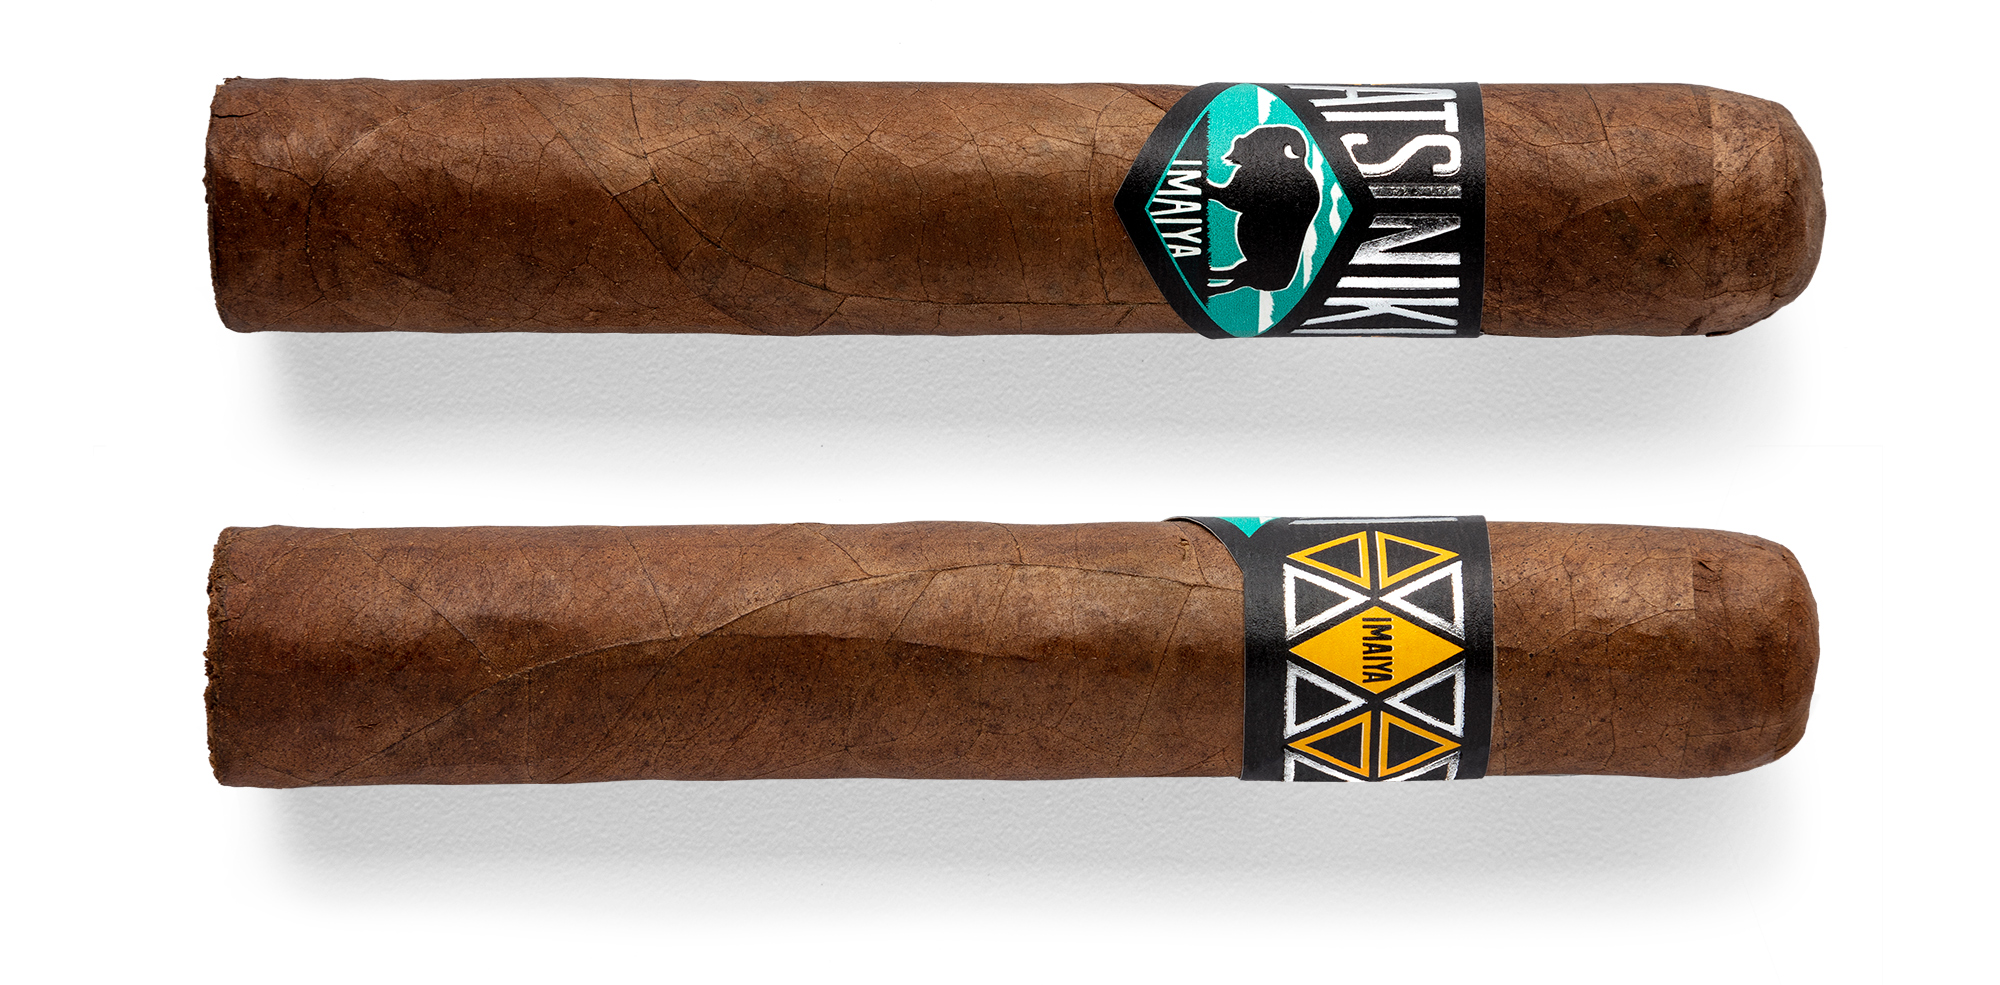 Imaiya Cigar | Oak, toast, sweet anise. Honors the spirit of victories past — and still to come.